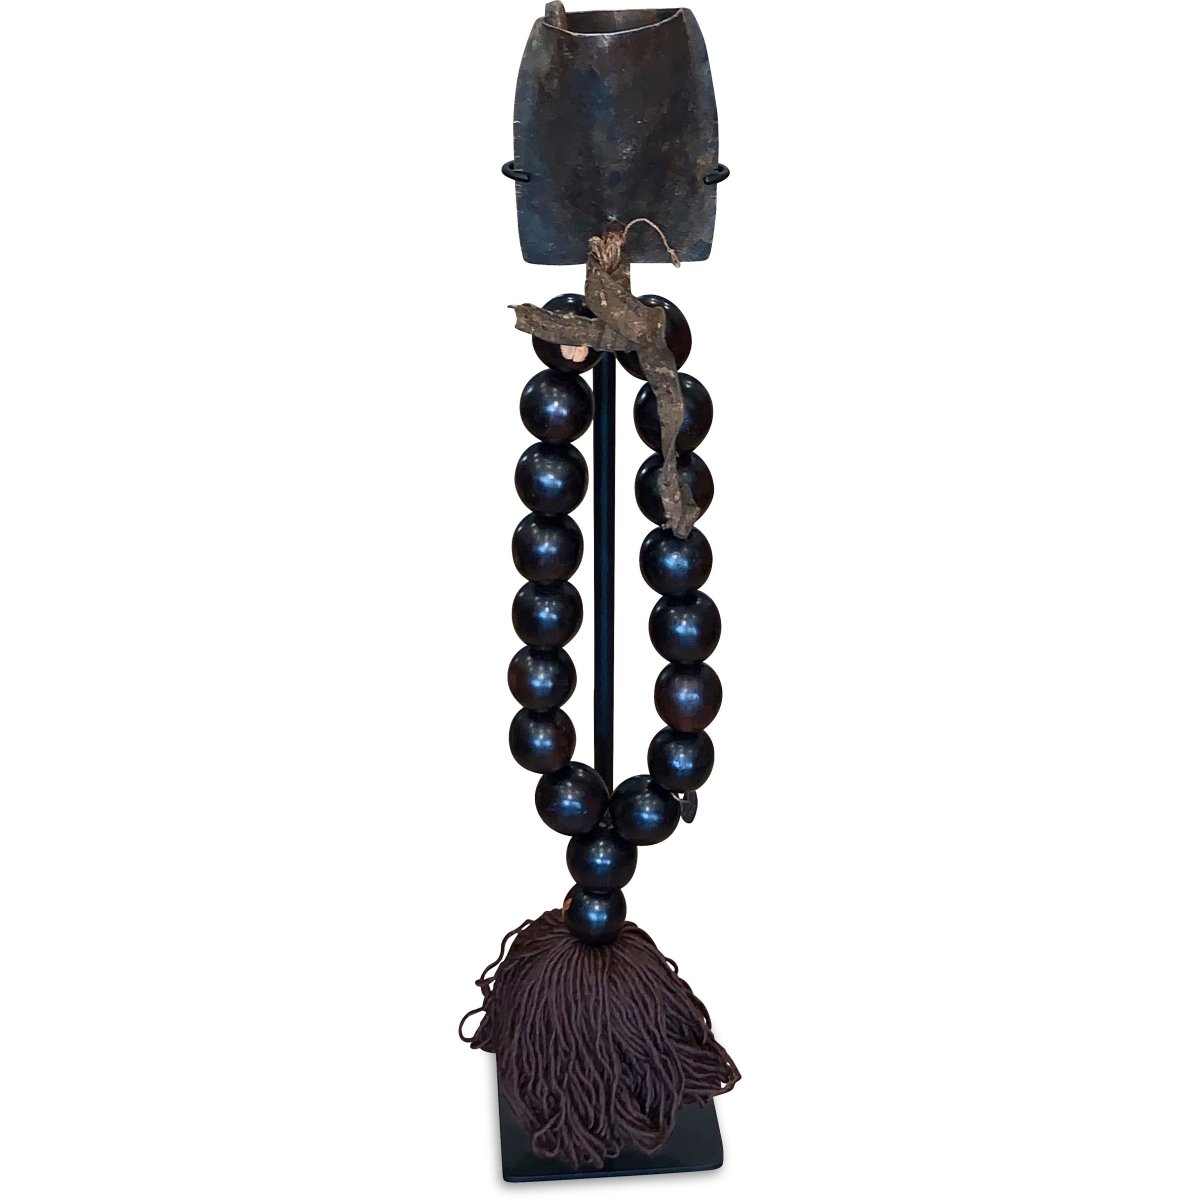 Vintage African Wood Bead Sculpture with Brown Yarn, Antique Bell, + Leather - Homebody Denver